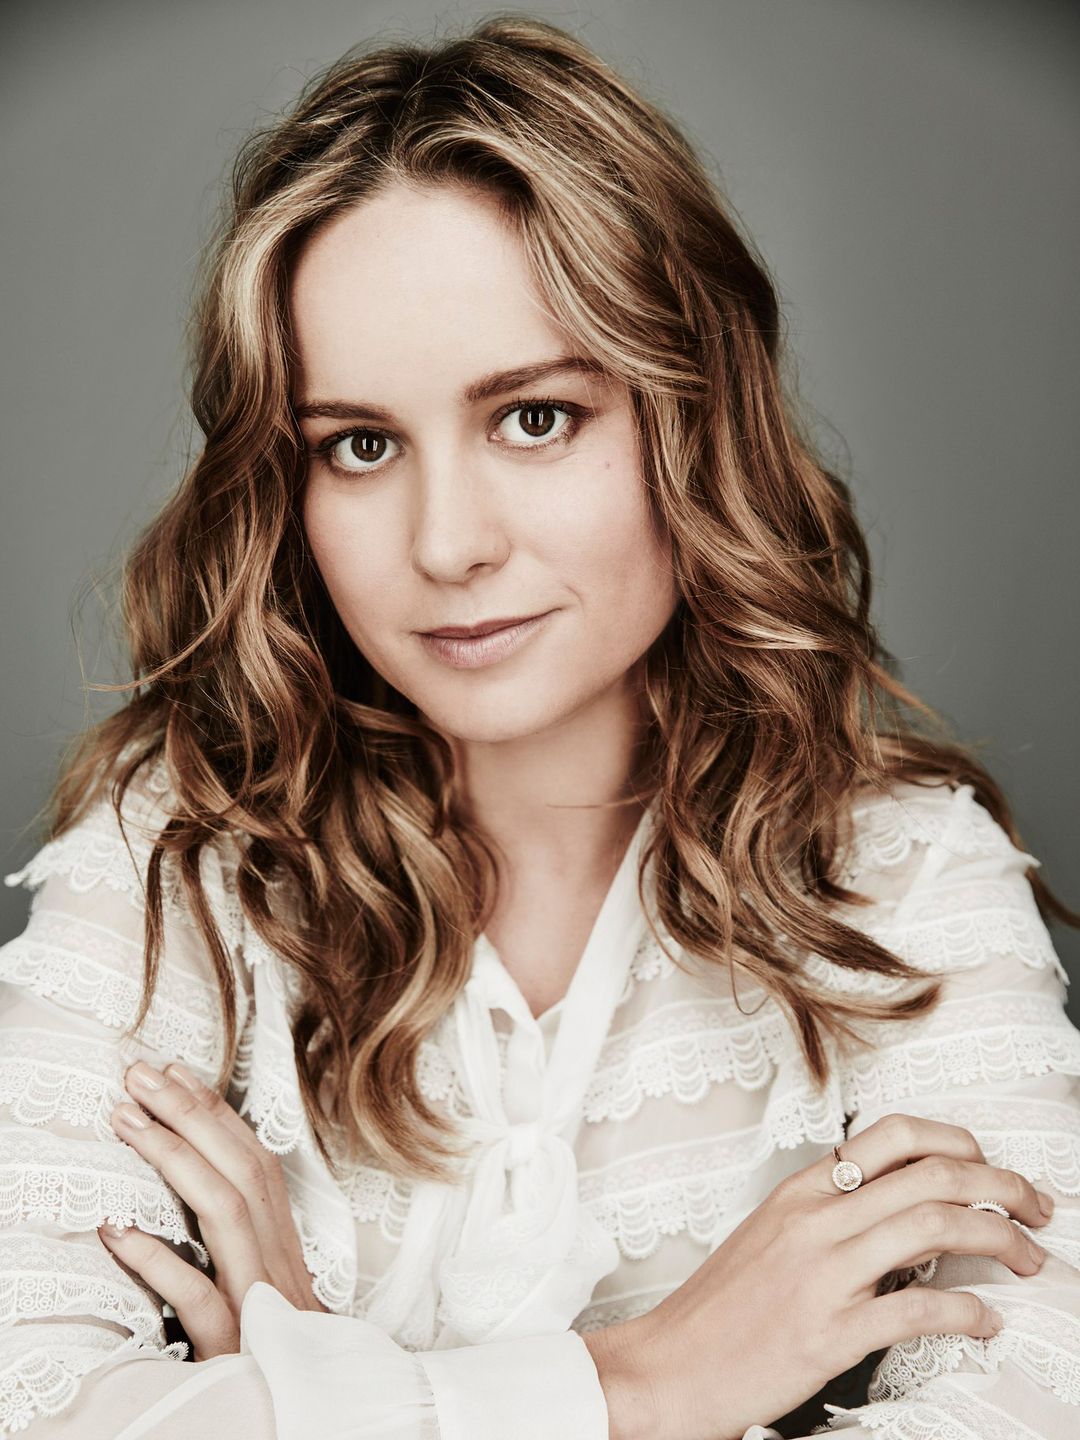 Brie Larson height and weight